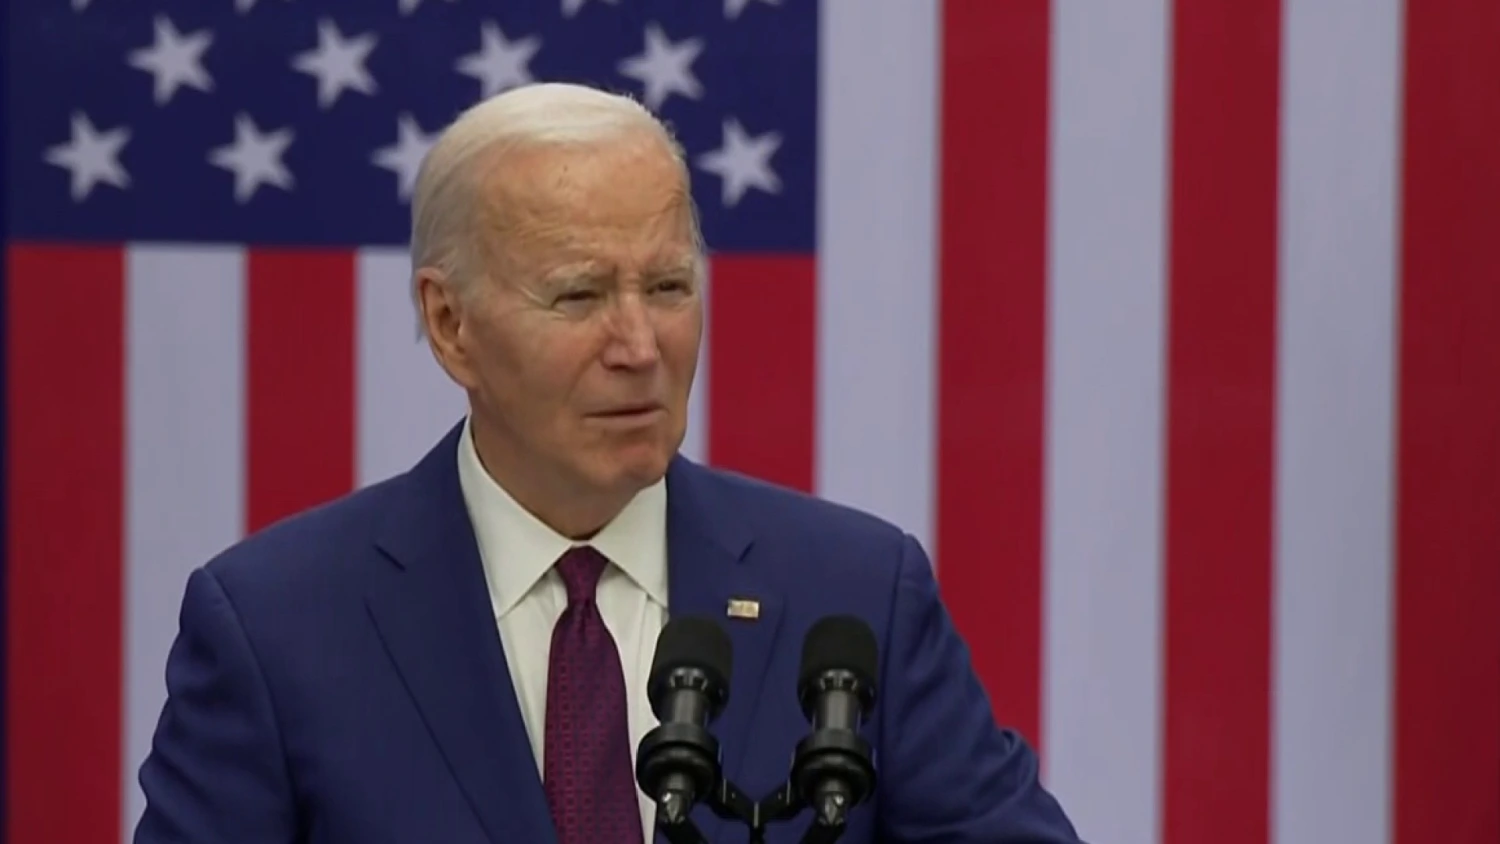 Biden's accusations countered as Trump emphasizes no plans for cuts (Credits: NBC News)